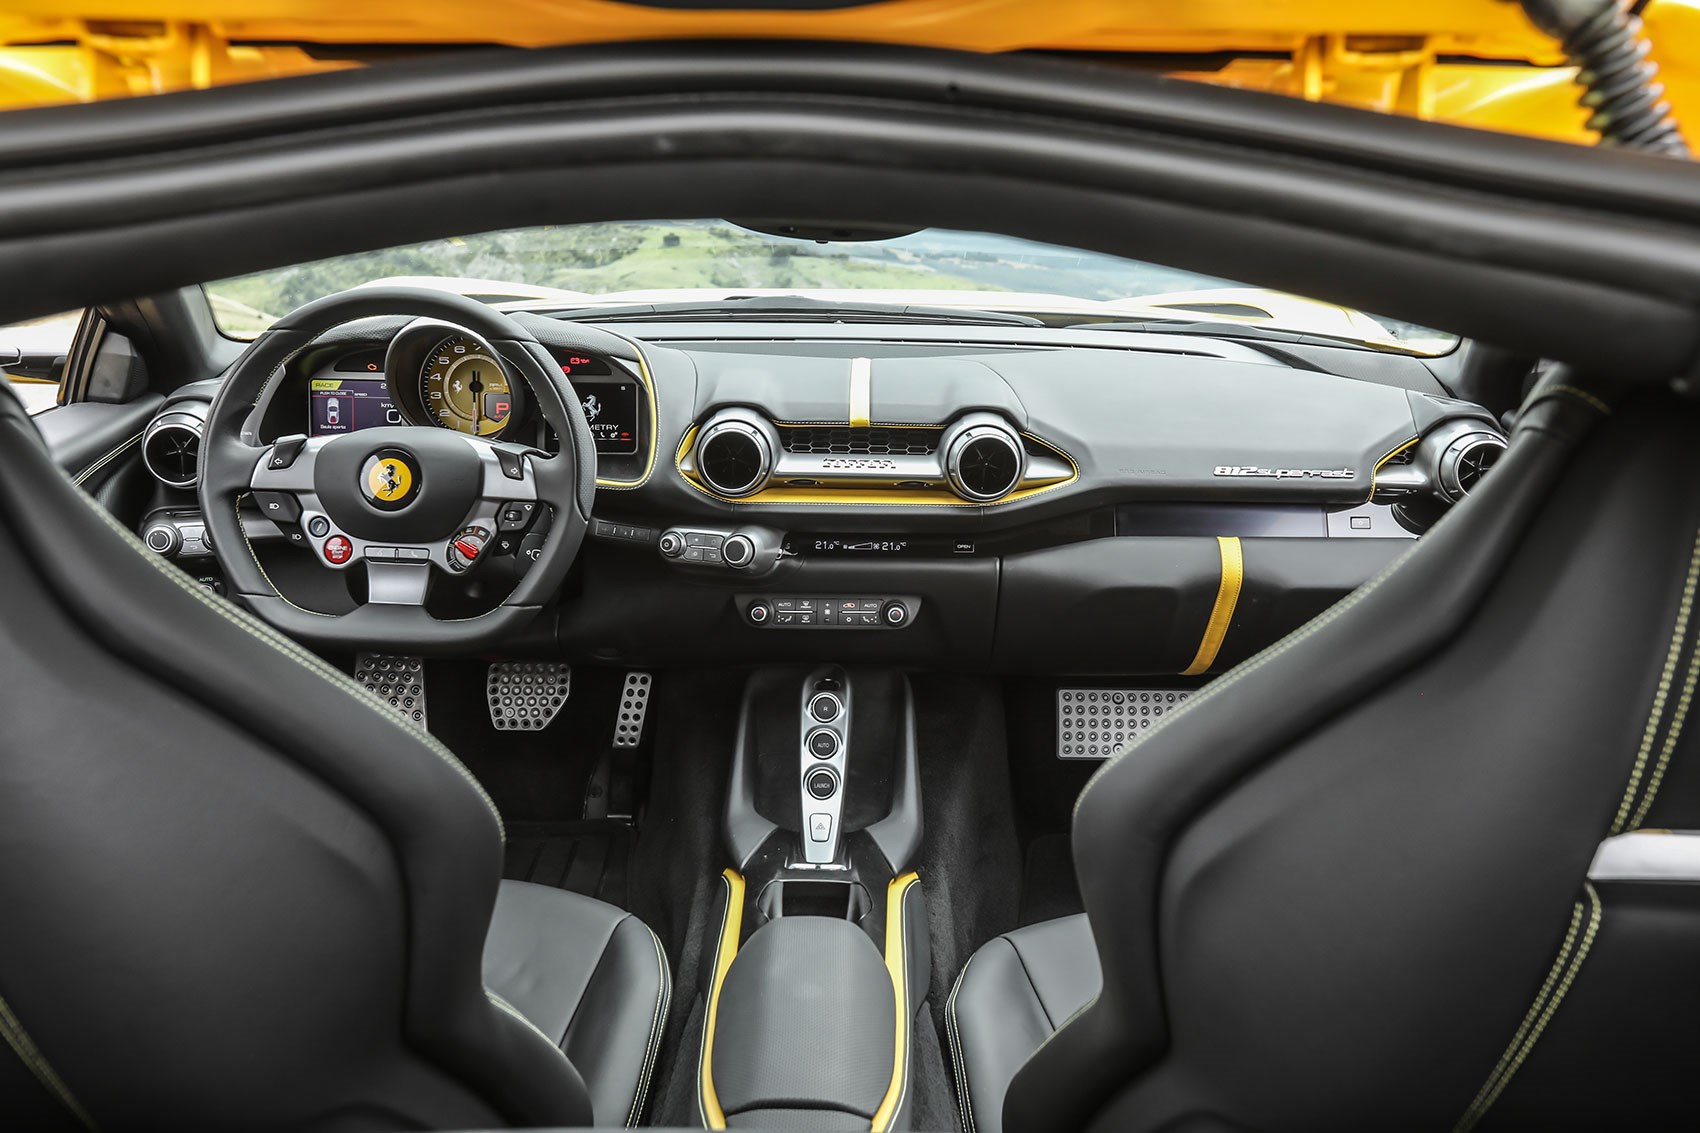 Ferrari 812 Superfast: a two-seater GT